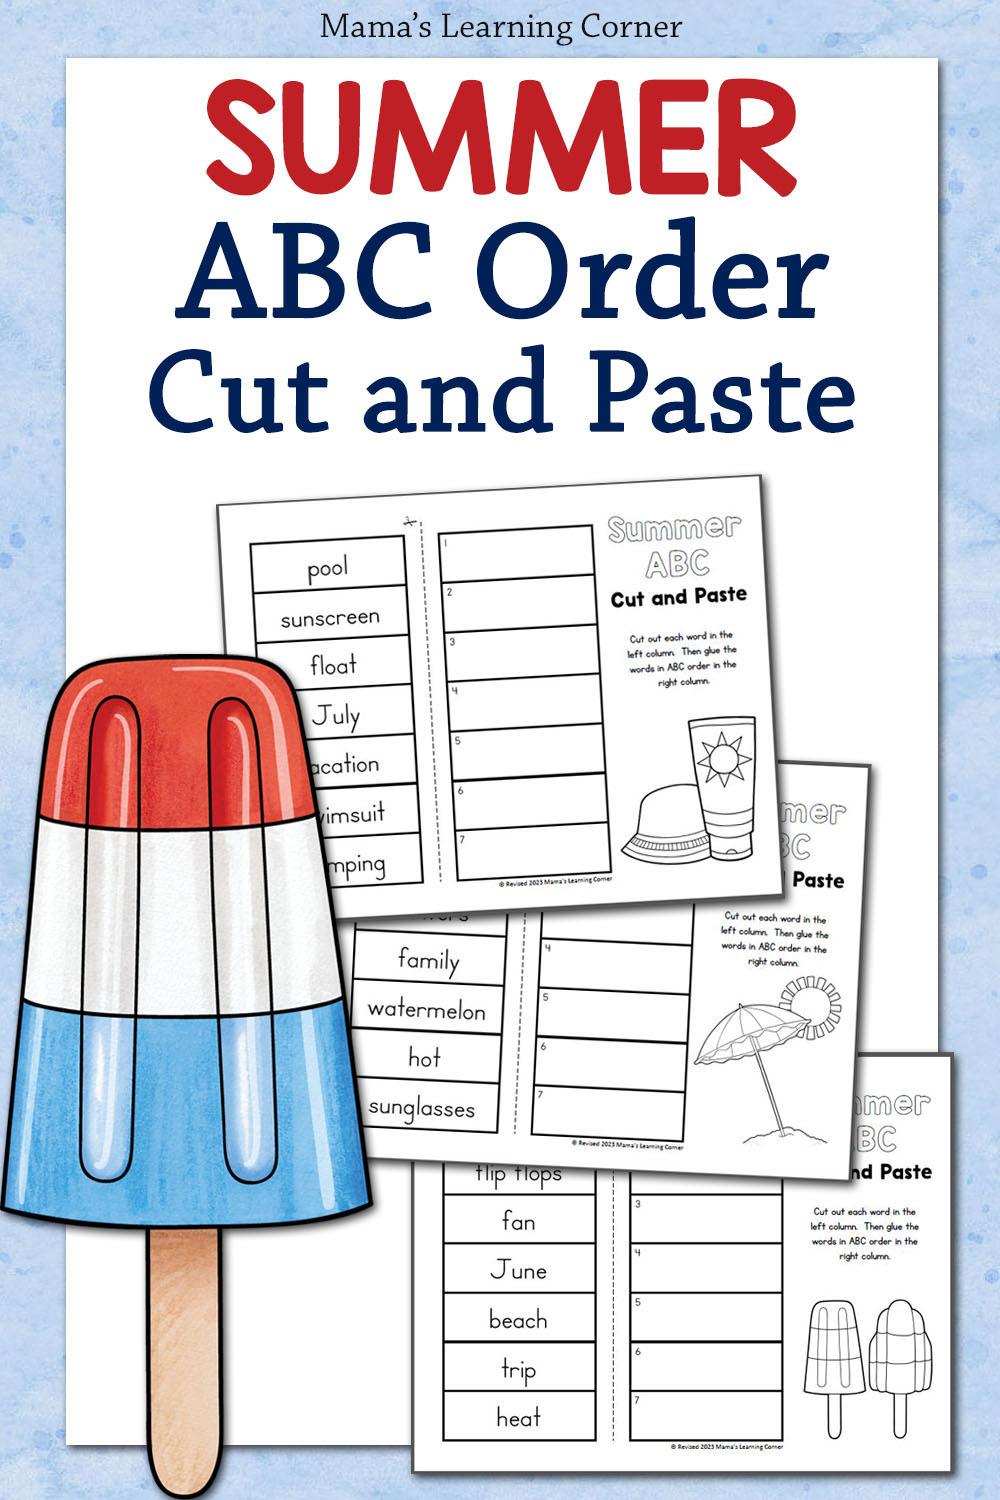 Summer ABC Order Cut and Paste Worksheets - Mamas Learning Corner